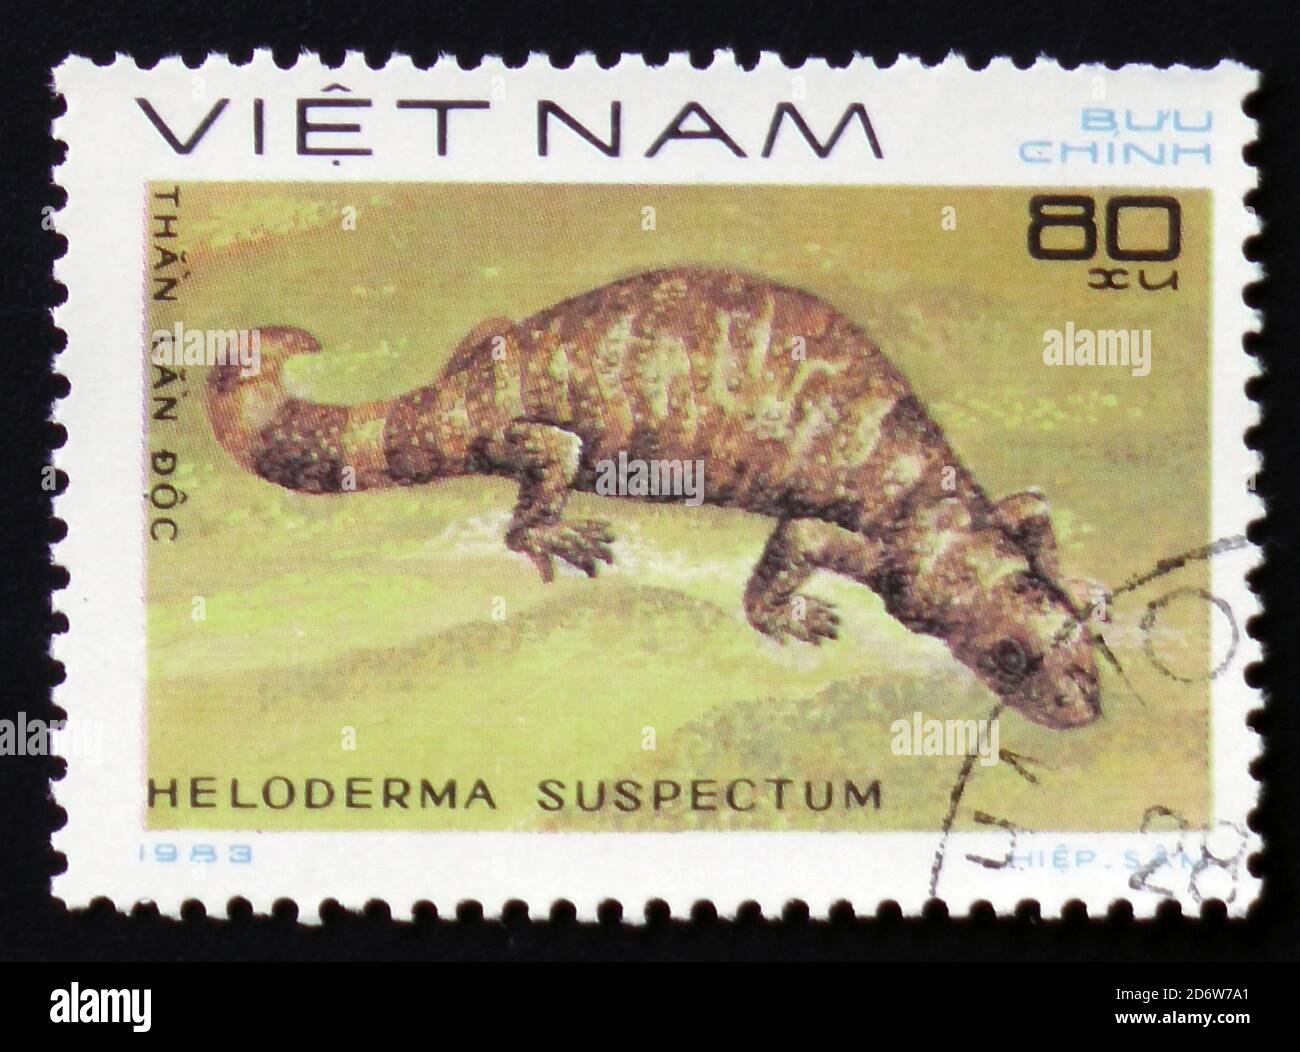 MOSCOW, RUSSIA - FEBRUARY 12, 2017: A Stamp printed in VIETNAM shows the image of a Gila Monster with the description 'Heloderma suspectum' from the s Stock Photo